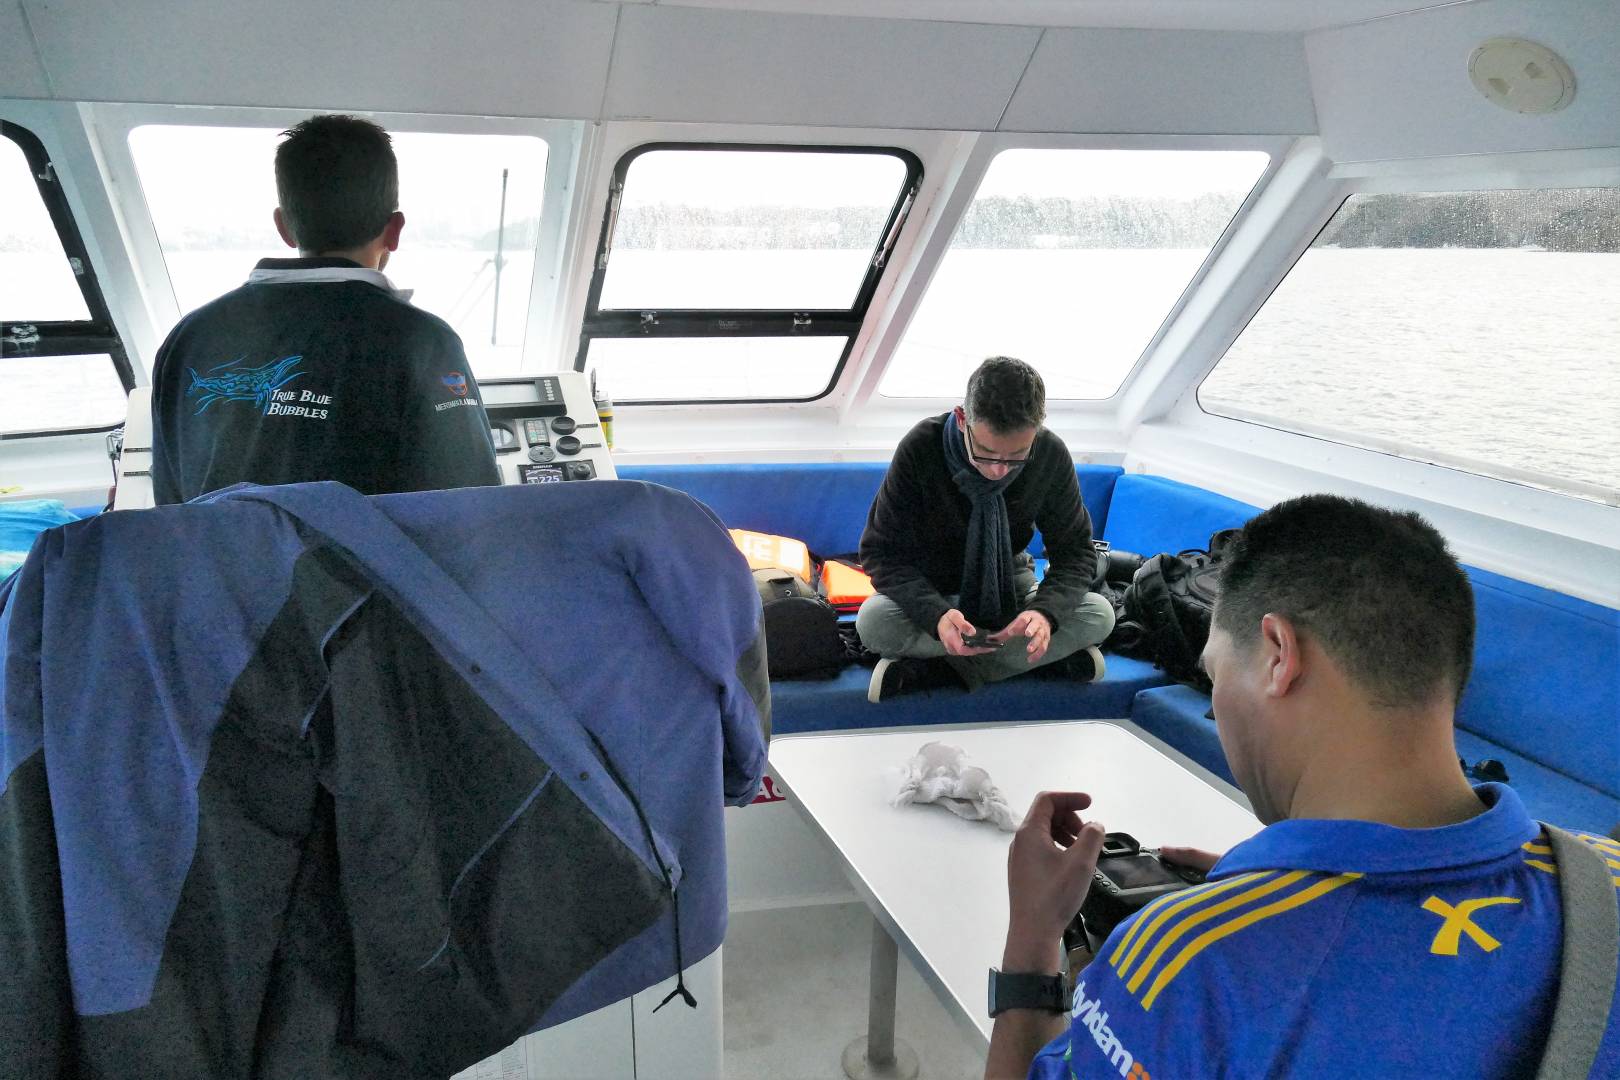 Inside the captain steered us back while photographers began downloading and editing